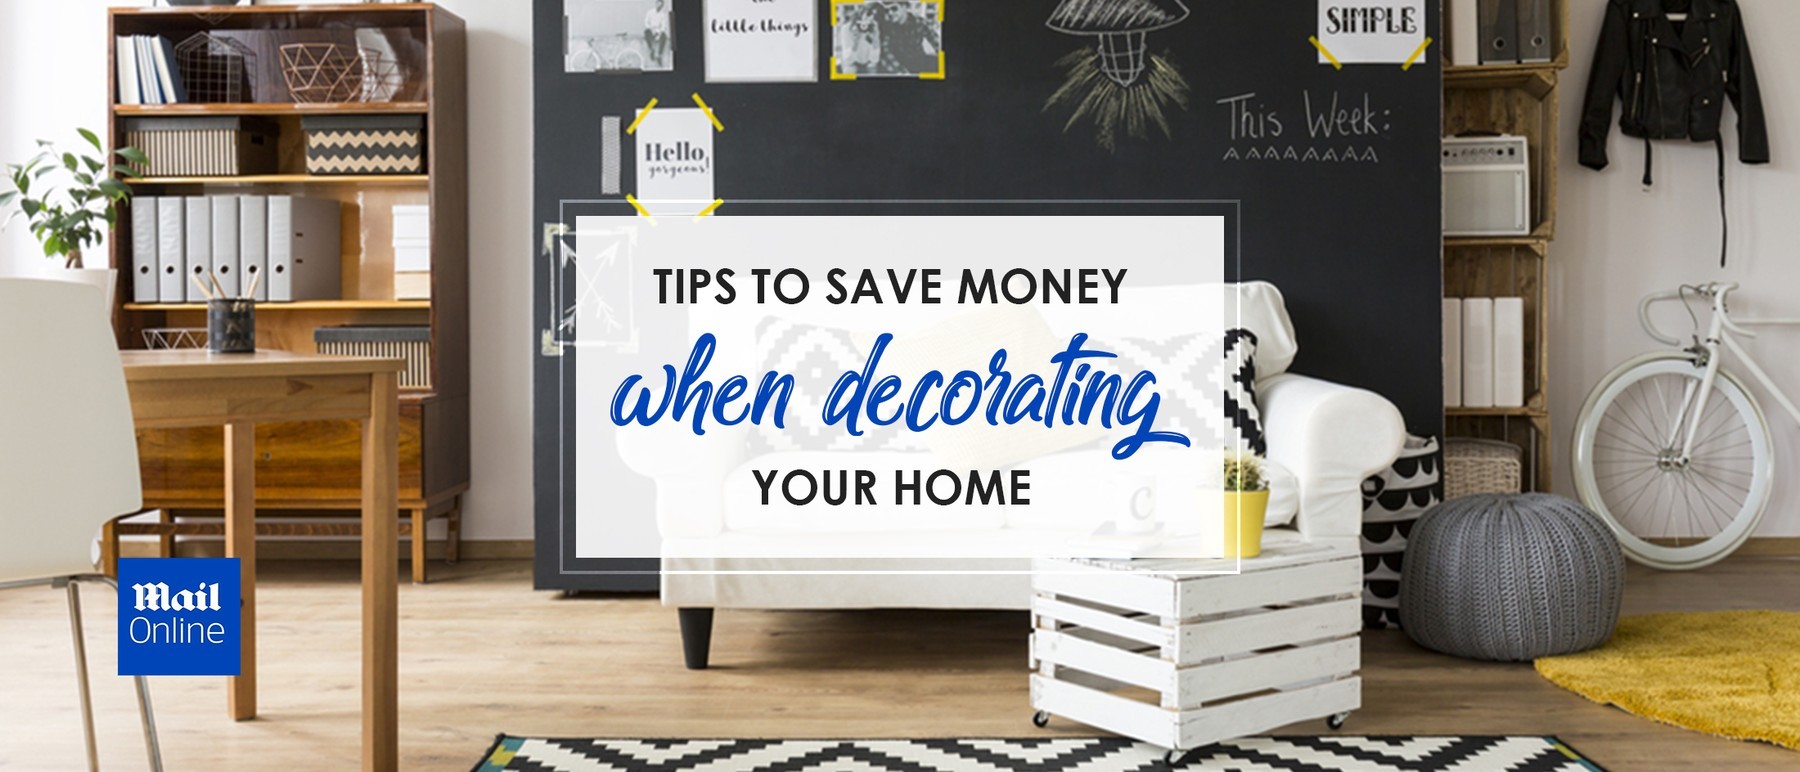 8 foolproof ways to save money on home decoration